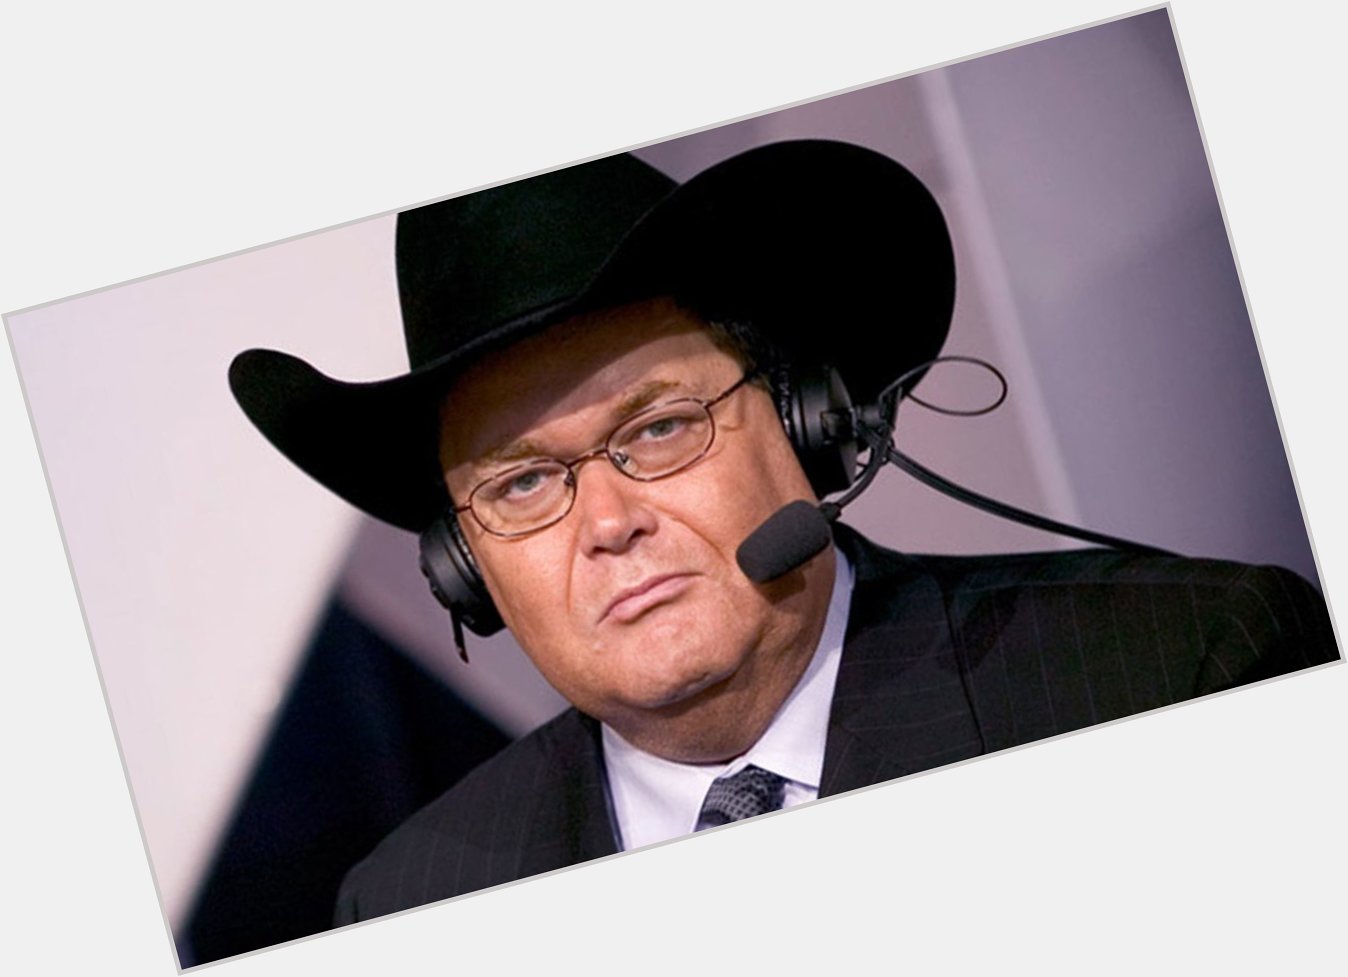 The Indiana Pizza Club wishes Jim Ross a VERY HAPPY BIRTHDAY today! Enjoy some BBQ pizza today, J.R.!     